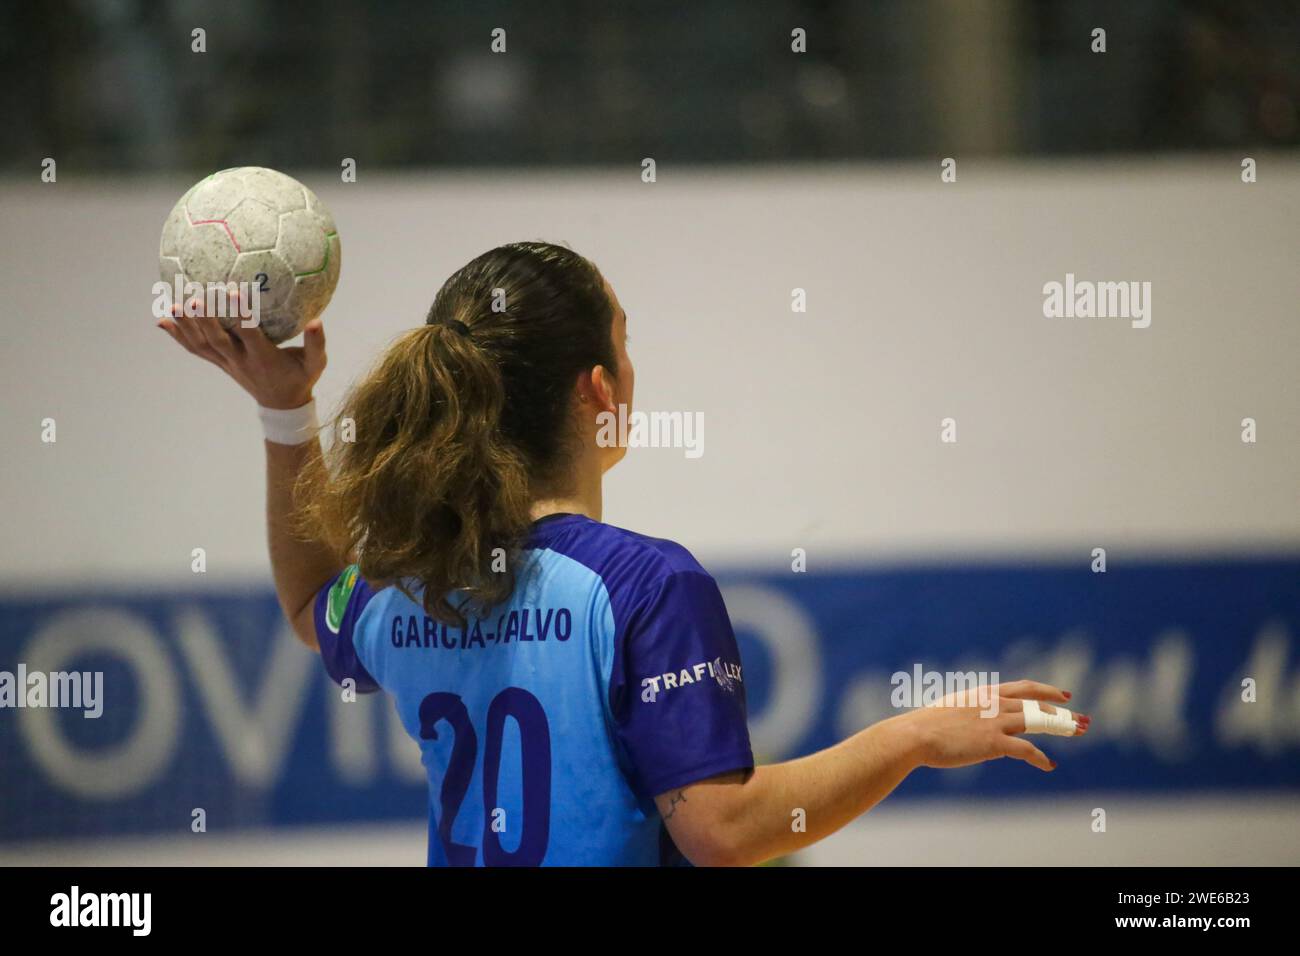 Oviedo, Spain, 23th January, 2024: The player of Lobas Global Atac Oviedo, Carmen García-Calvo (20) with the ball during the Second phase of the XLV Copa de S.M. The Queen enters Lobas Global Atac Oviedo and Atticgo BM. Elche, on January 23, 2024, at the Florida Arena Municipal Sports Center, in Oviedo, Spain. Credit: Alberto Brevers / Alamy Live News. Stock Photo